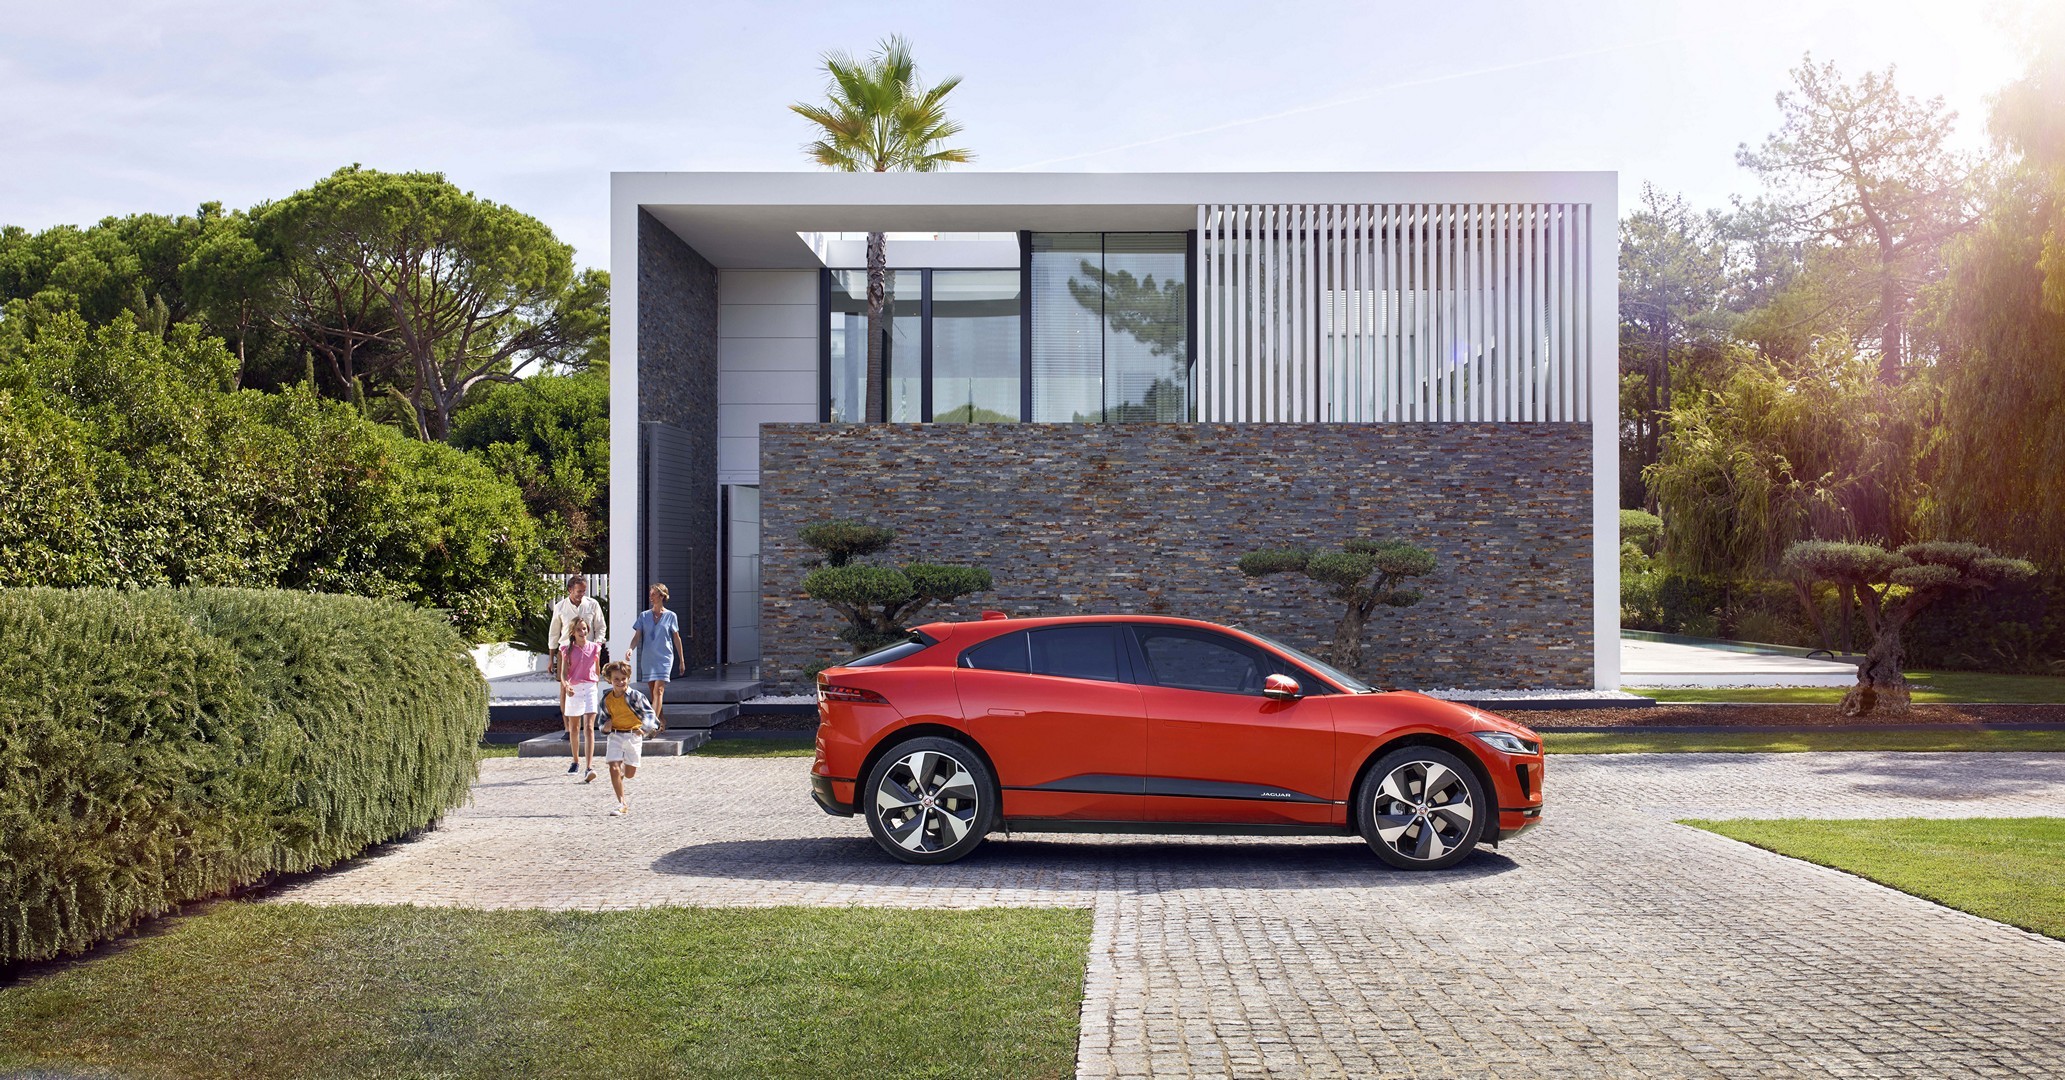 https://s1.cdn.autoevolution.com/images/news/gallery/2020-jaguar-i-pace-update-offers-234-miles-of-range-thanks-to-etrophy-know-how_40.jpg